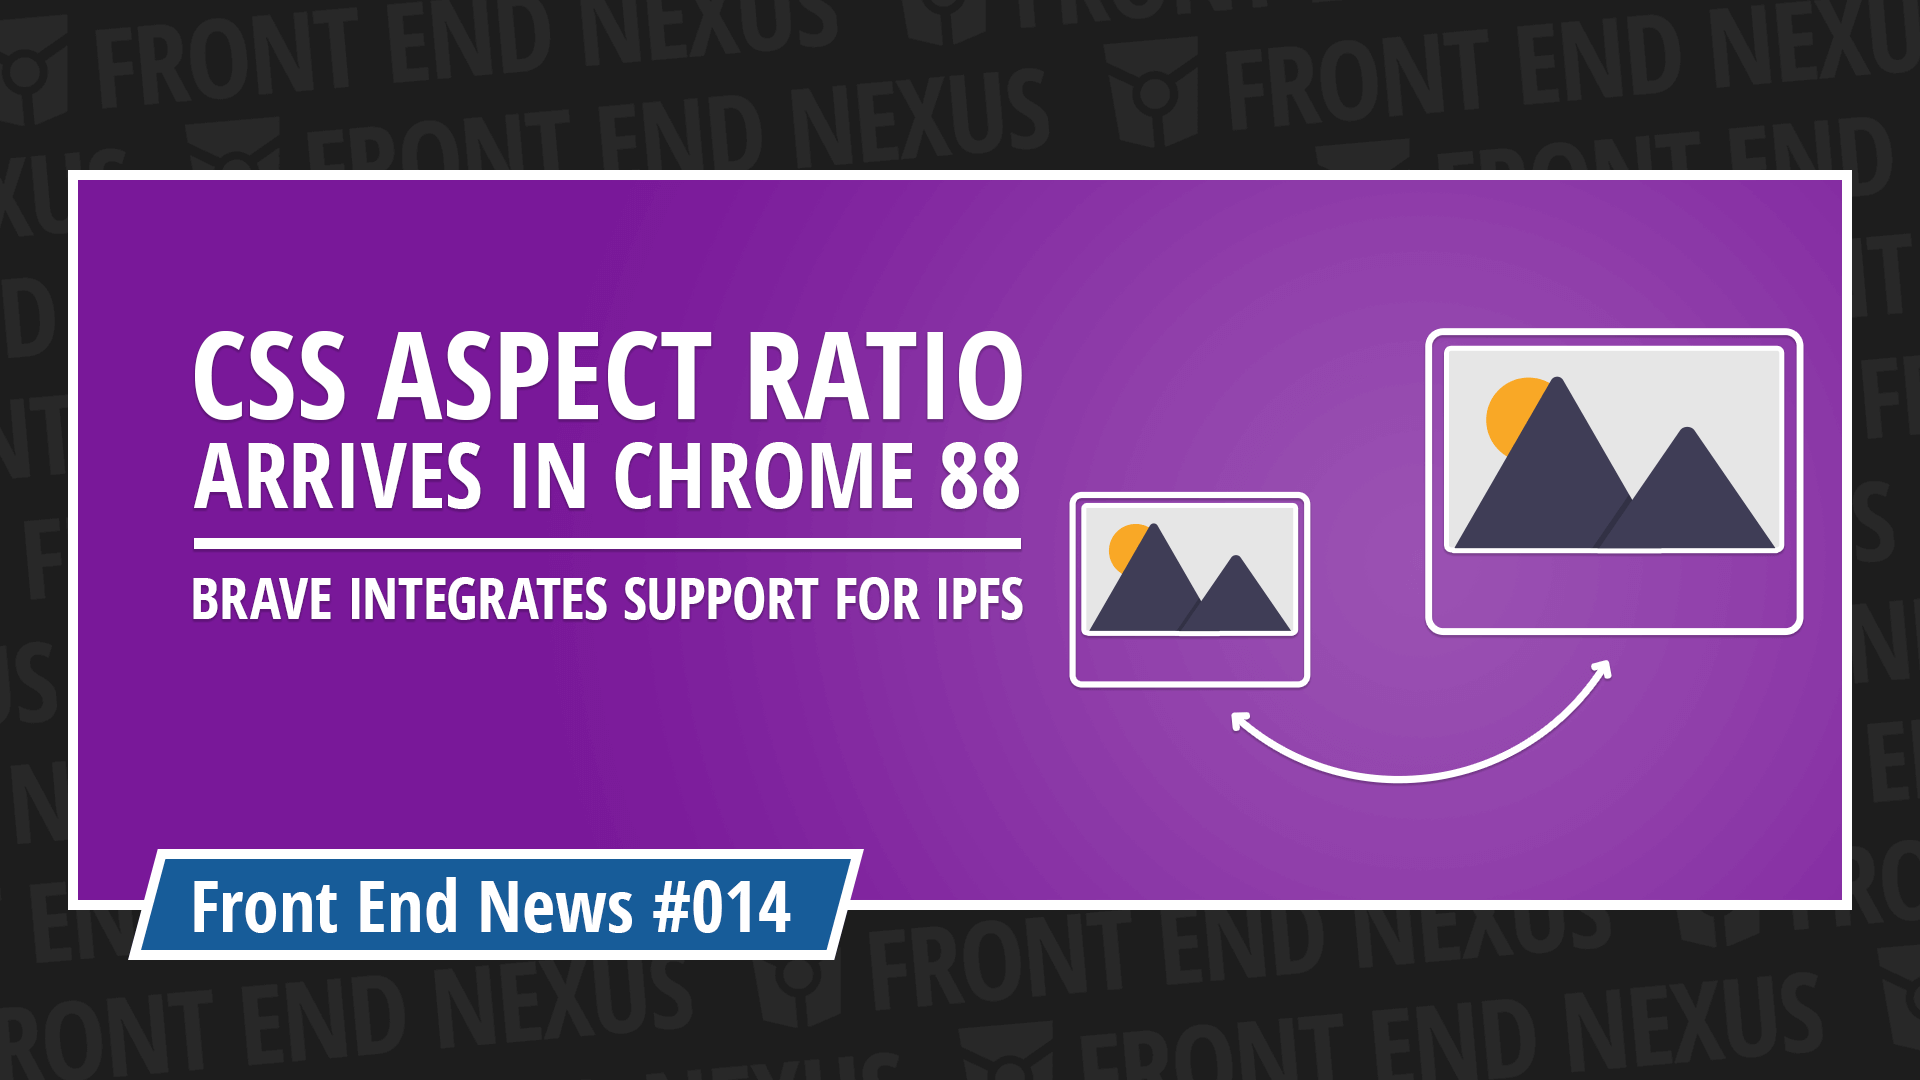 Aspect Ratio comes in Chrome 88, Brave ads IPFS support, and the new Edge 88 | Front End News #014